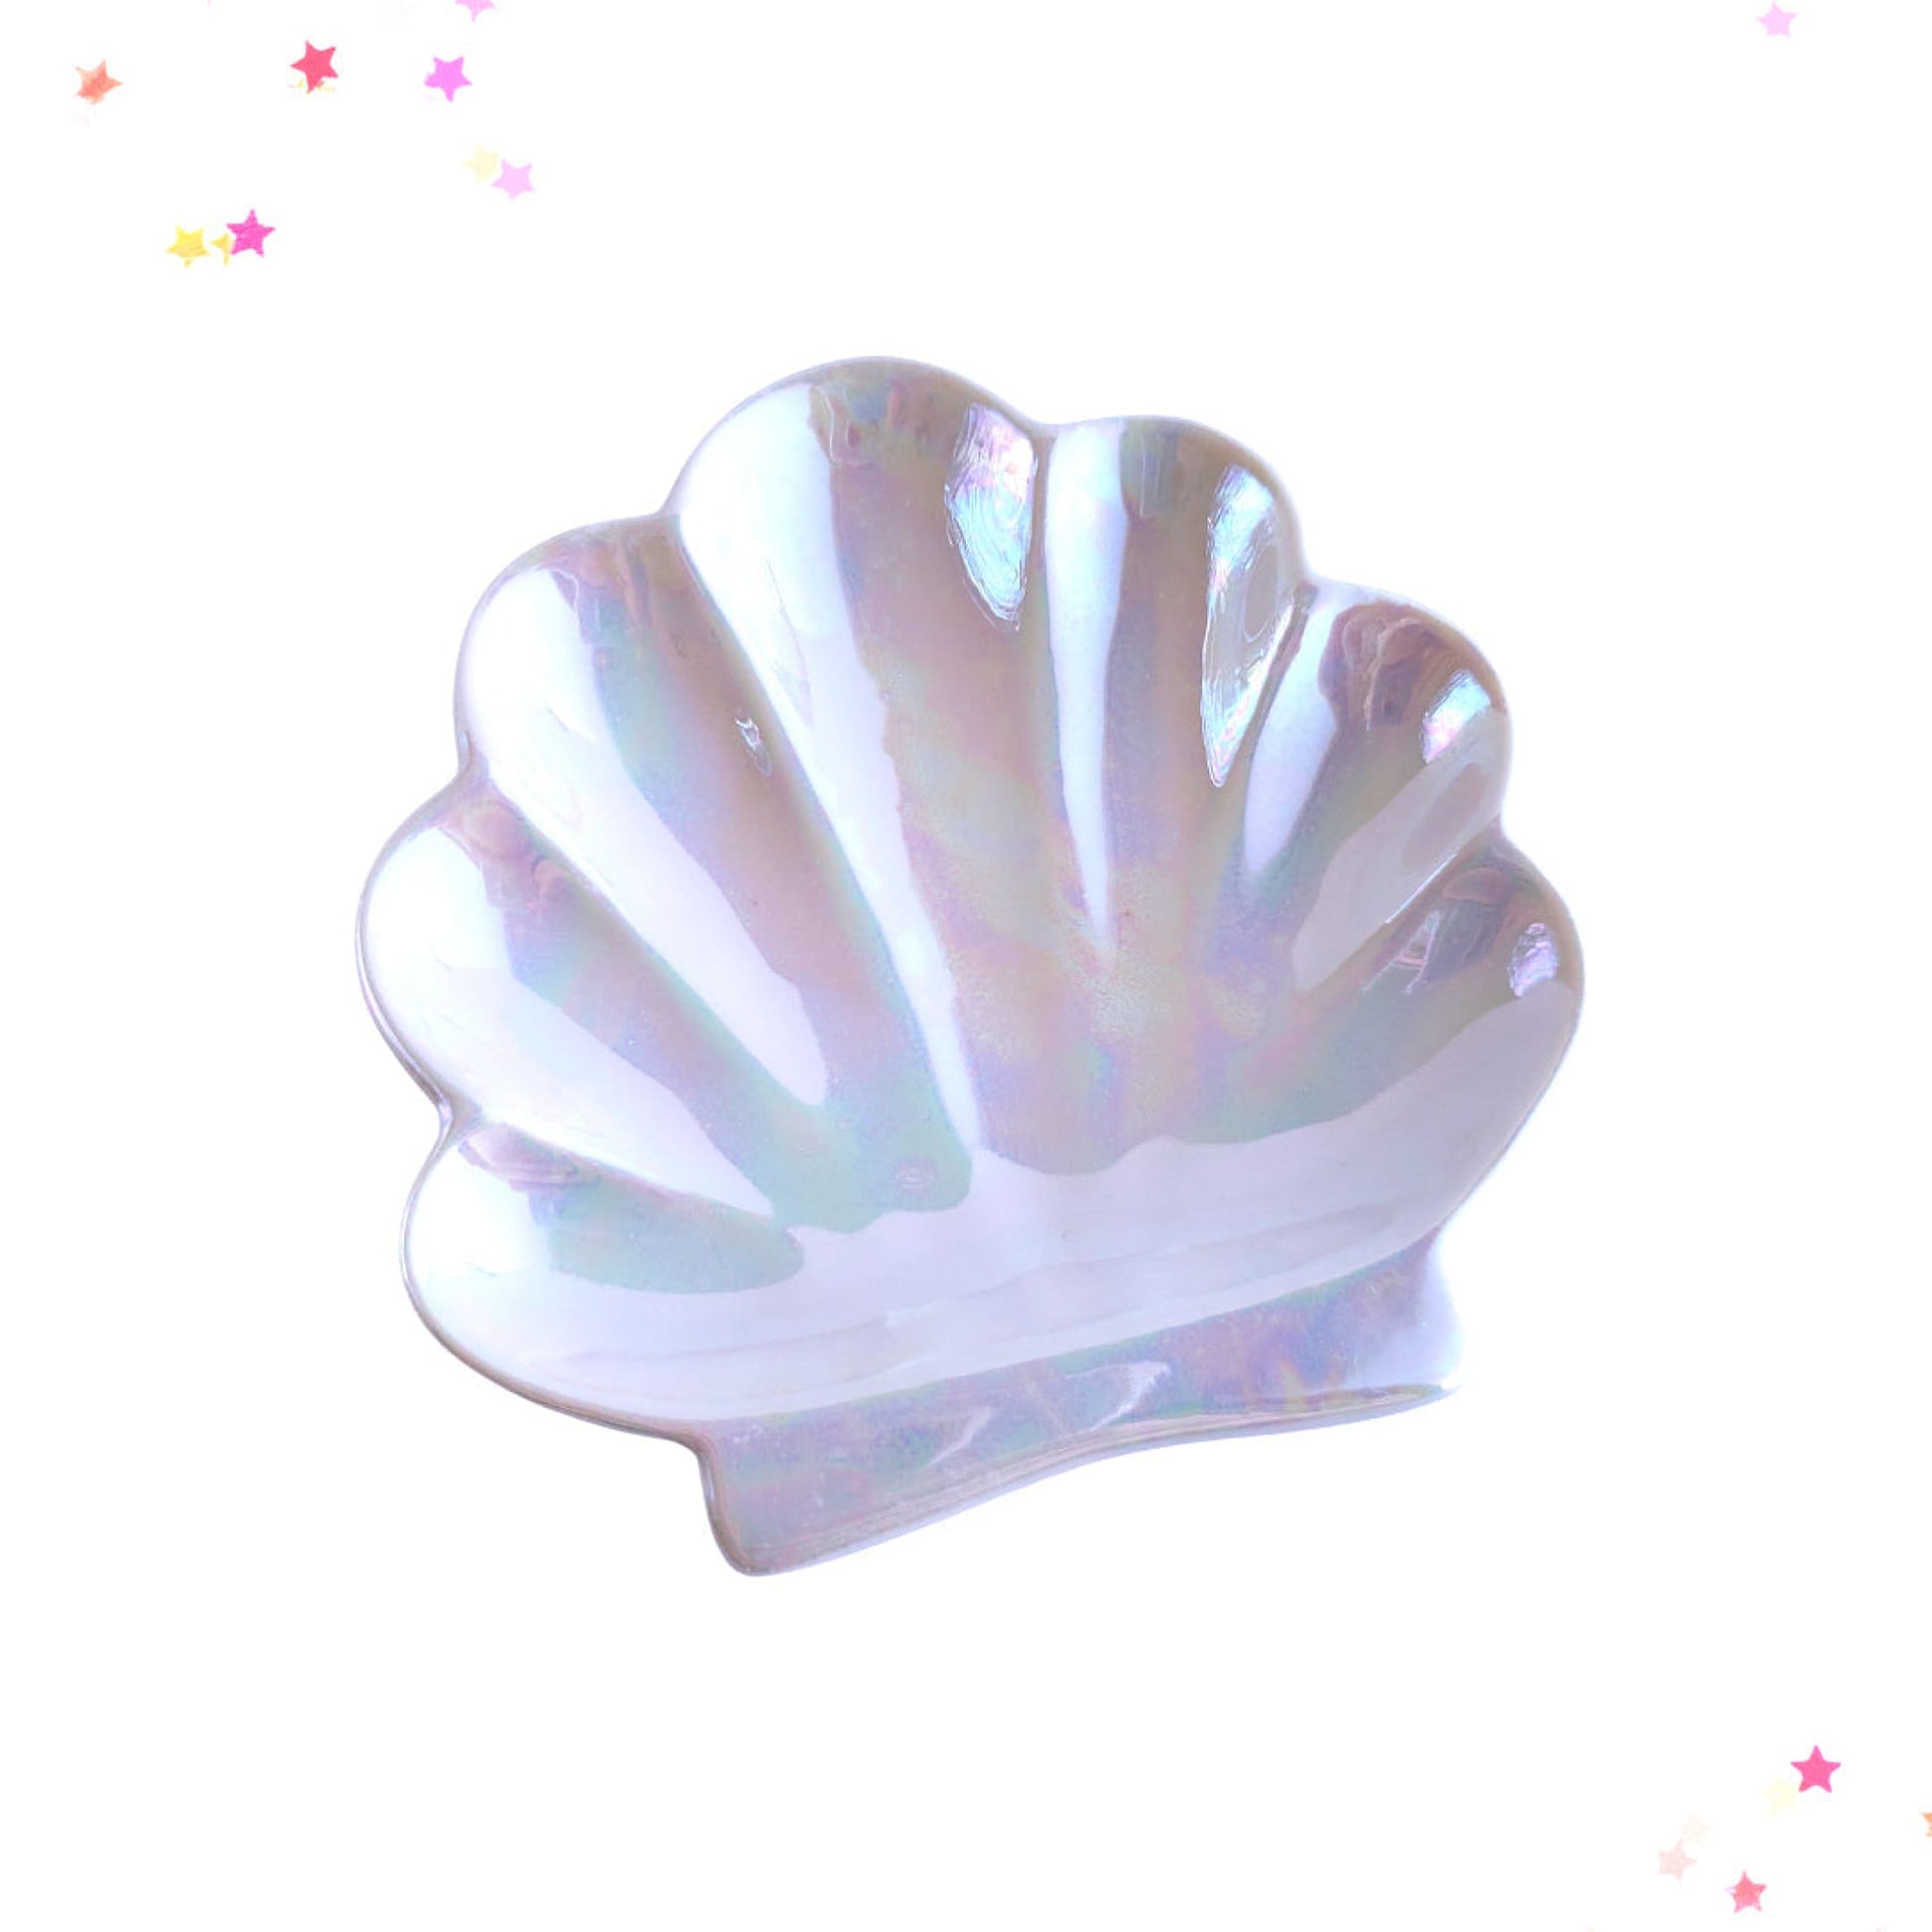 Shell Ceramic Trinket Dish from Confetti Kitty, Only 8.99